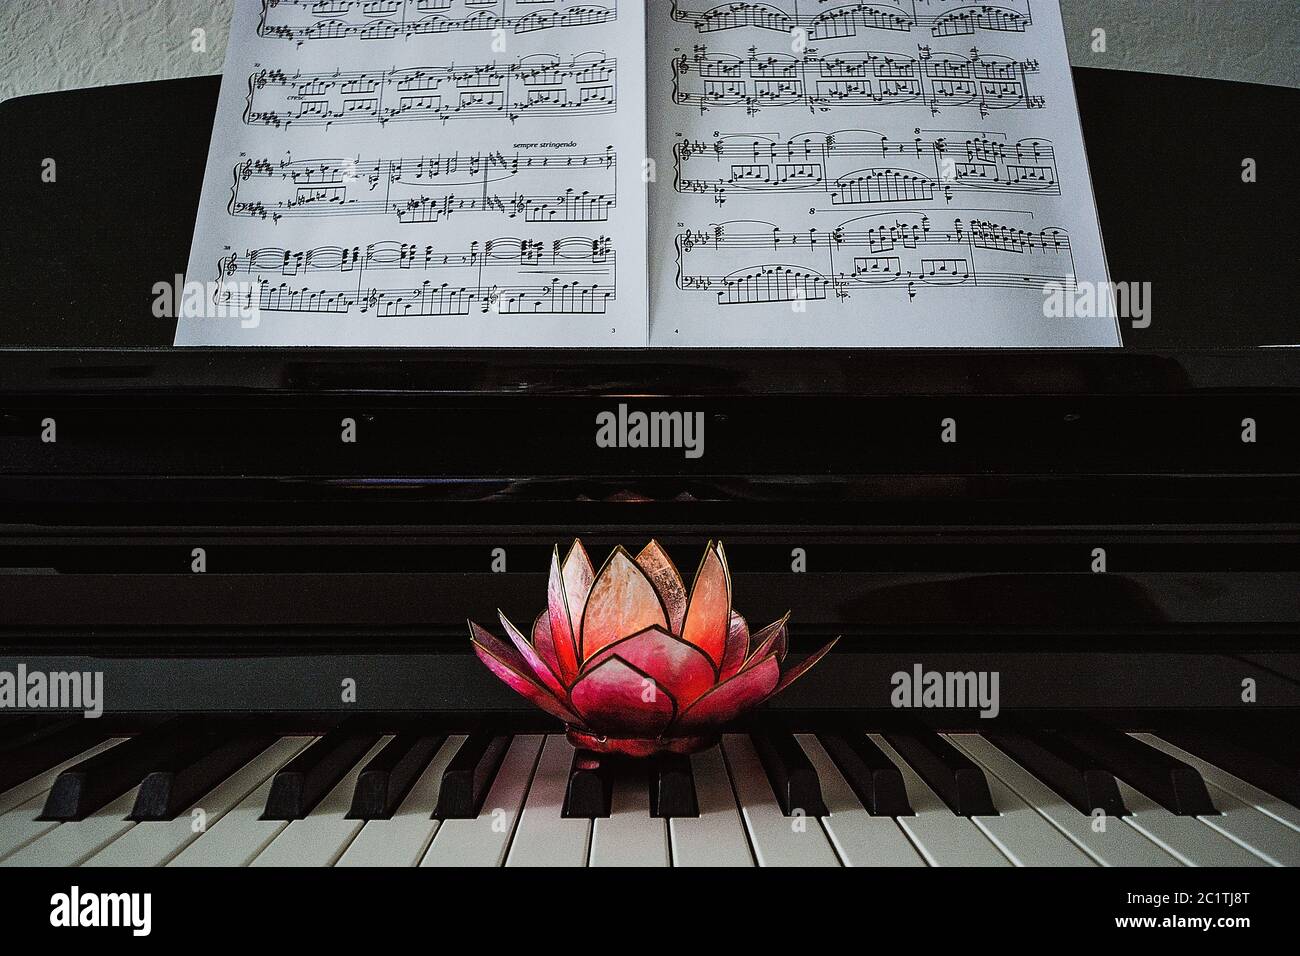 Piano with a candle standing in front of music Stock Photo